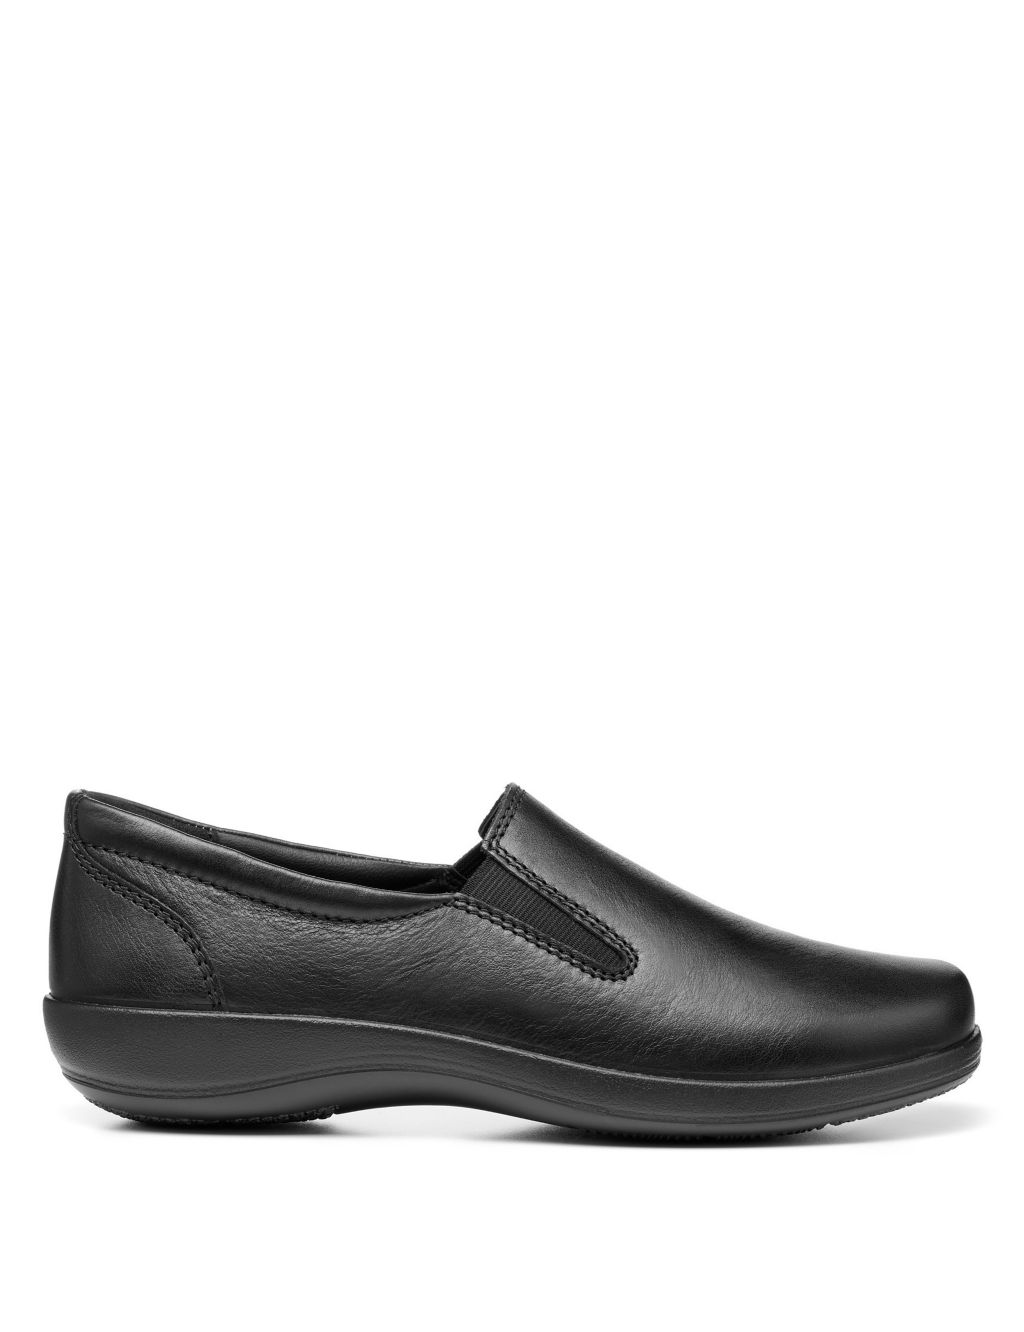 Glove II Leather Slip On Boat Shoes | Hotter | M&S